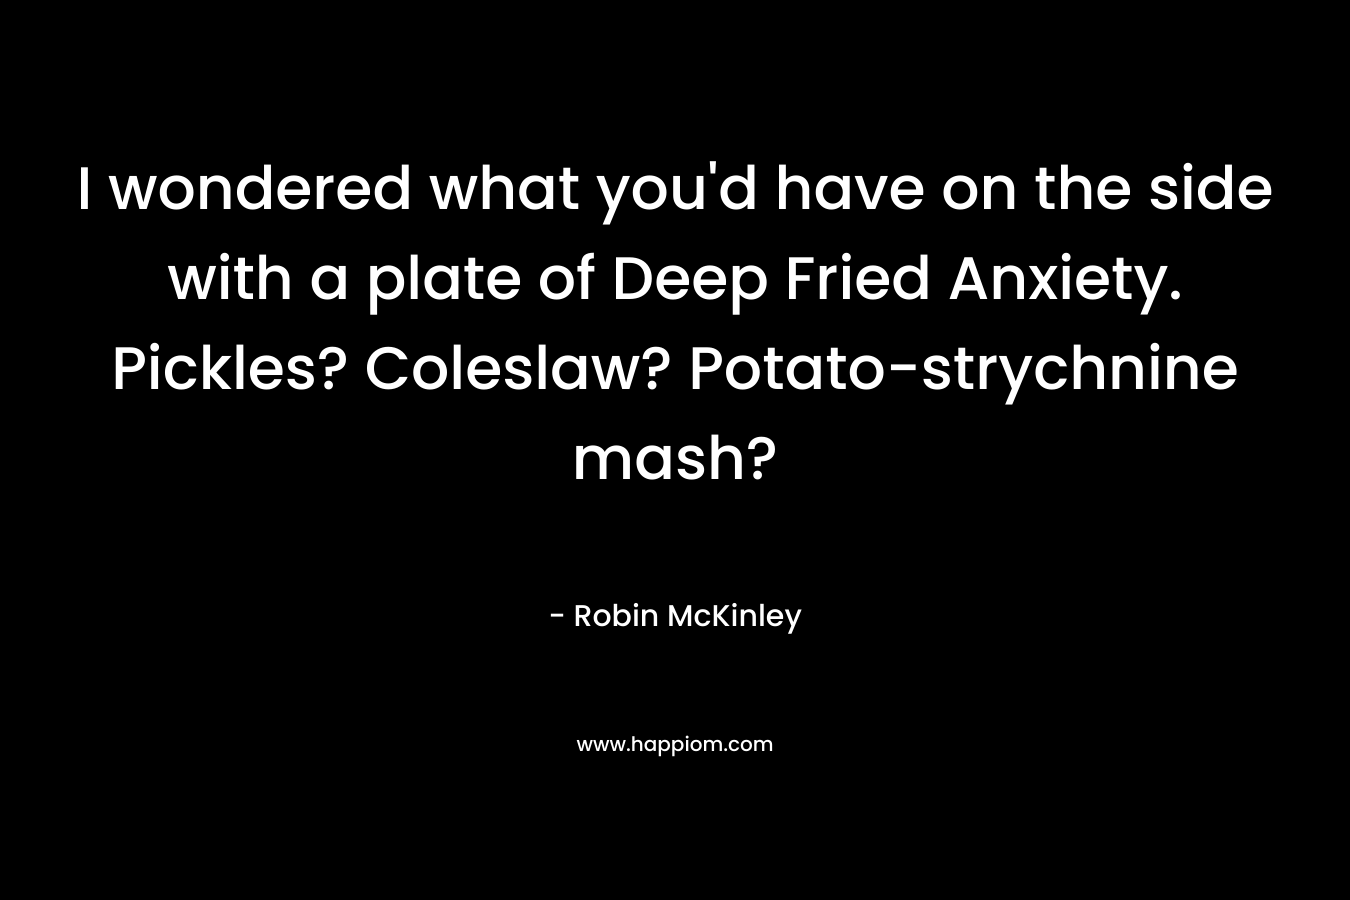 I wondered what you’d have on the side with a plate of Deep Fried Anxiety. Pickles? Coleslaw? Potato-strychnine mash? – Robin McKinley